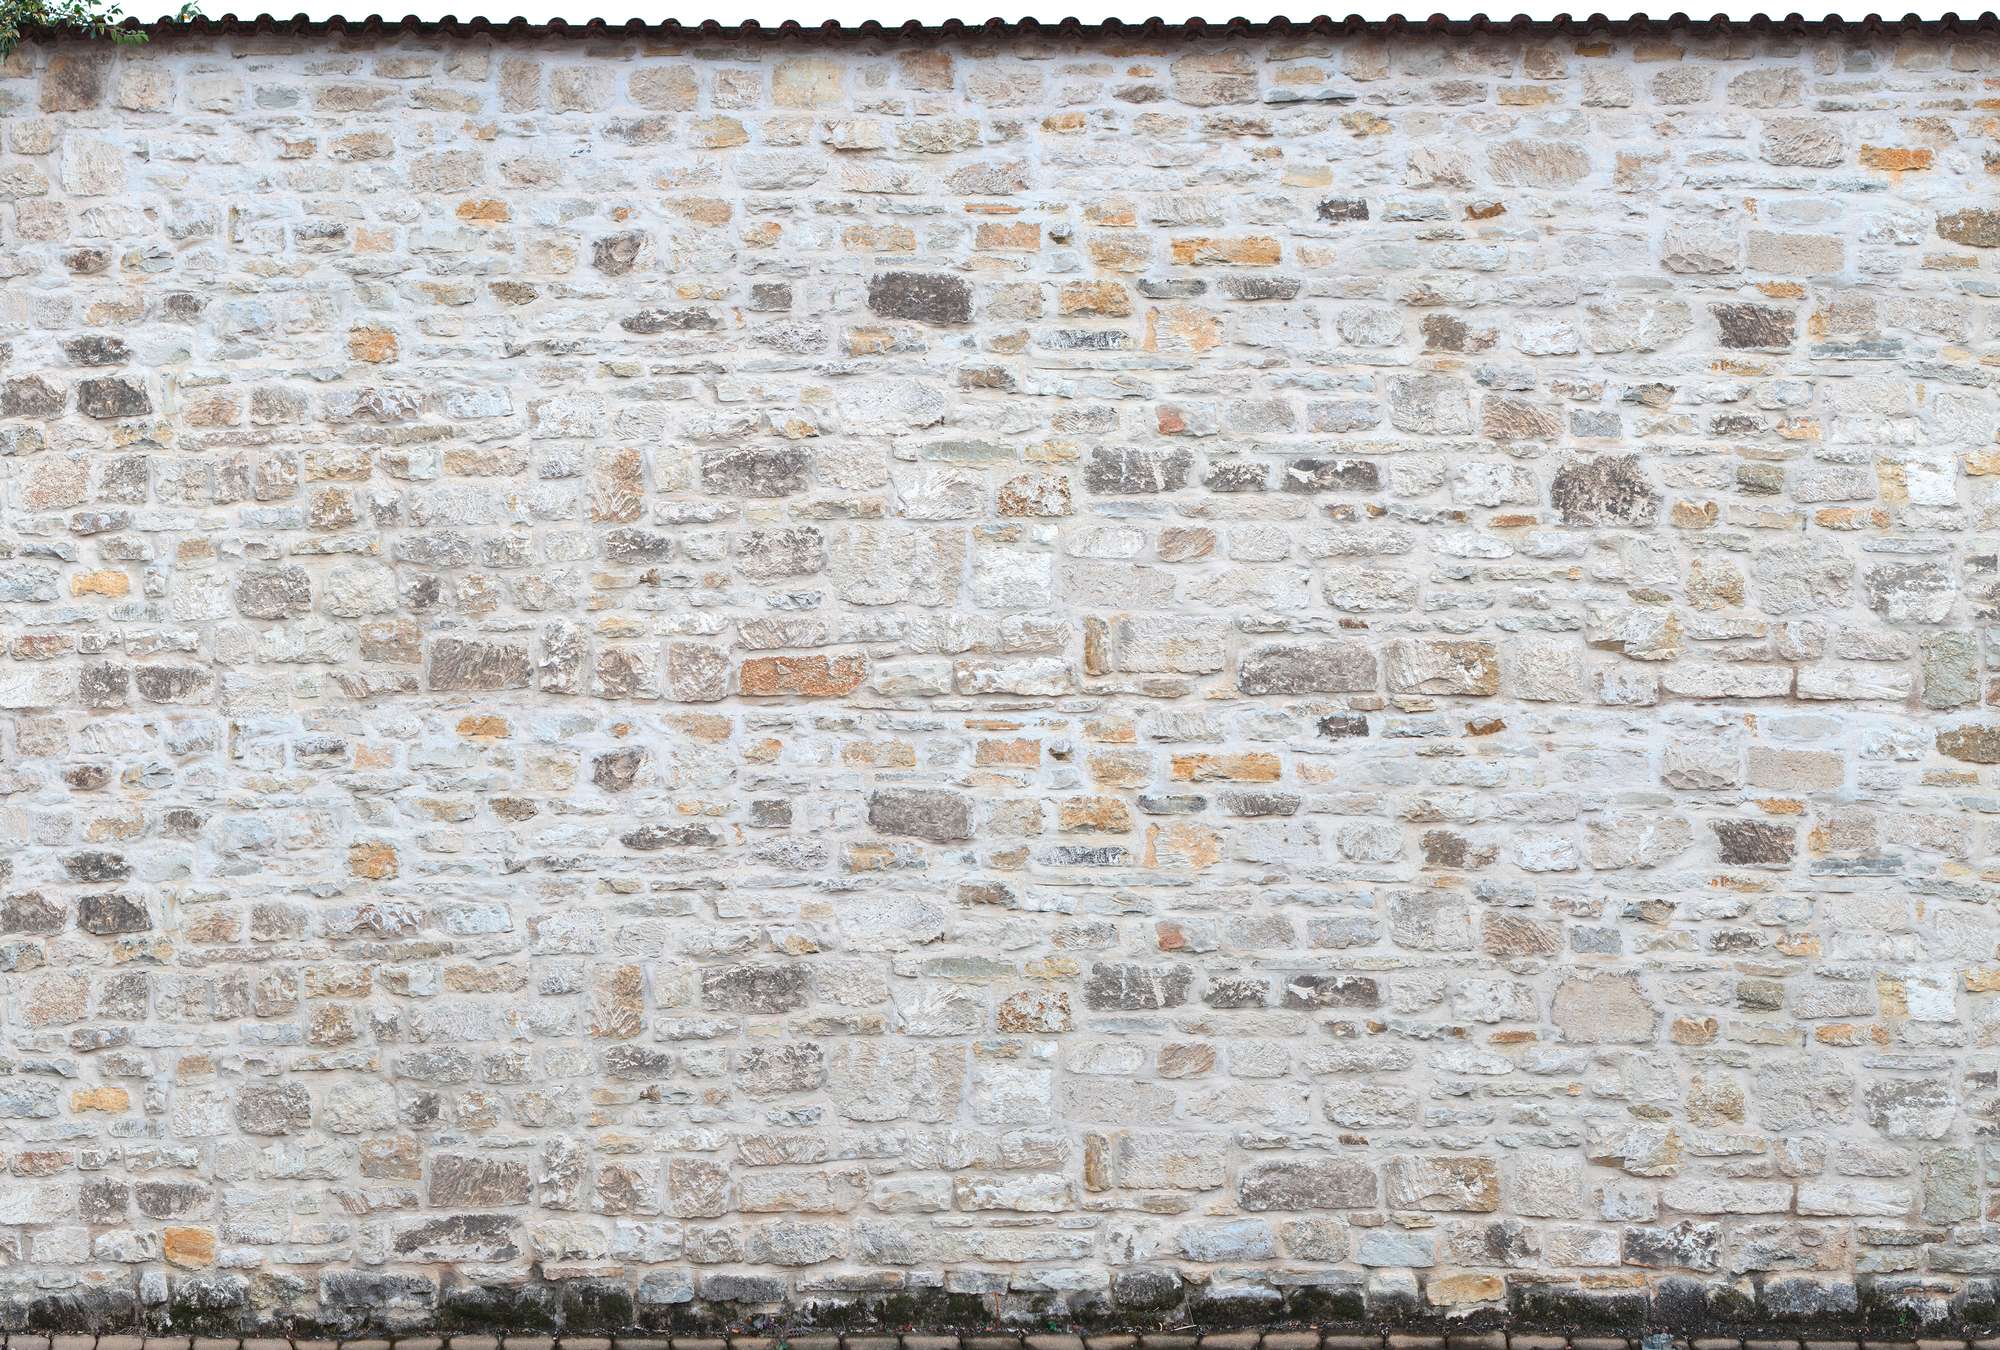             Country style mural - natural stone wall
        